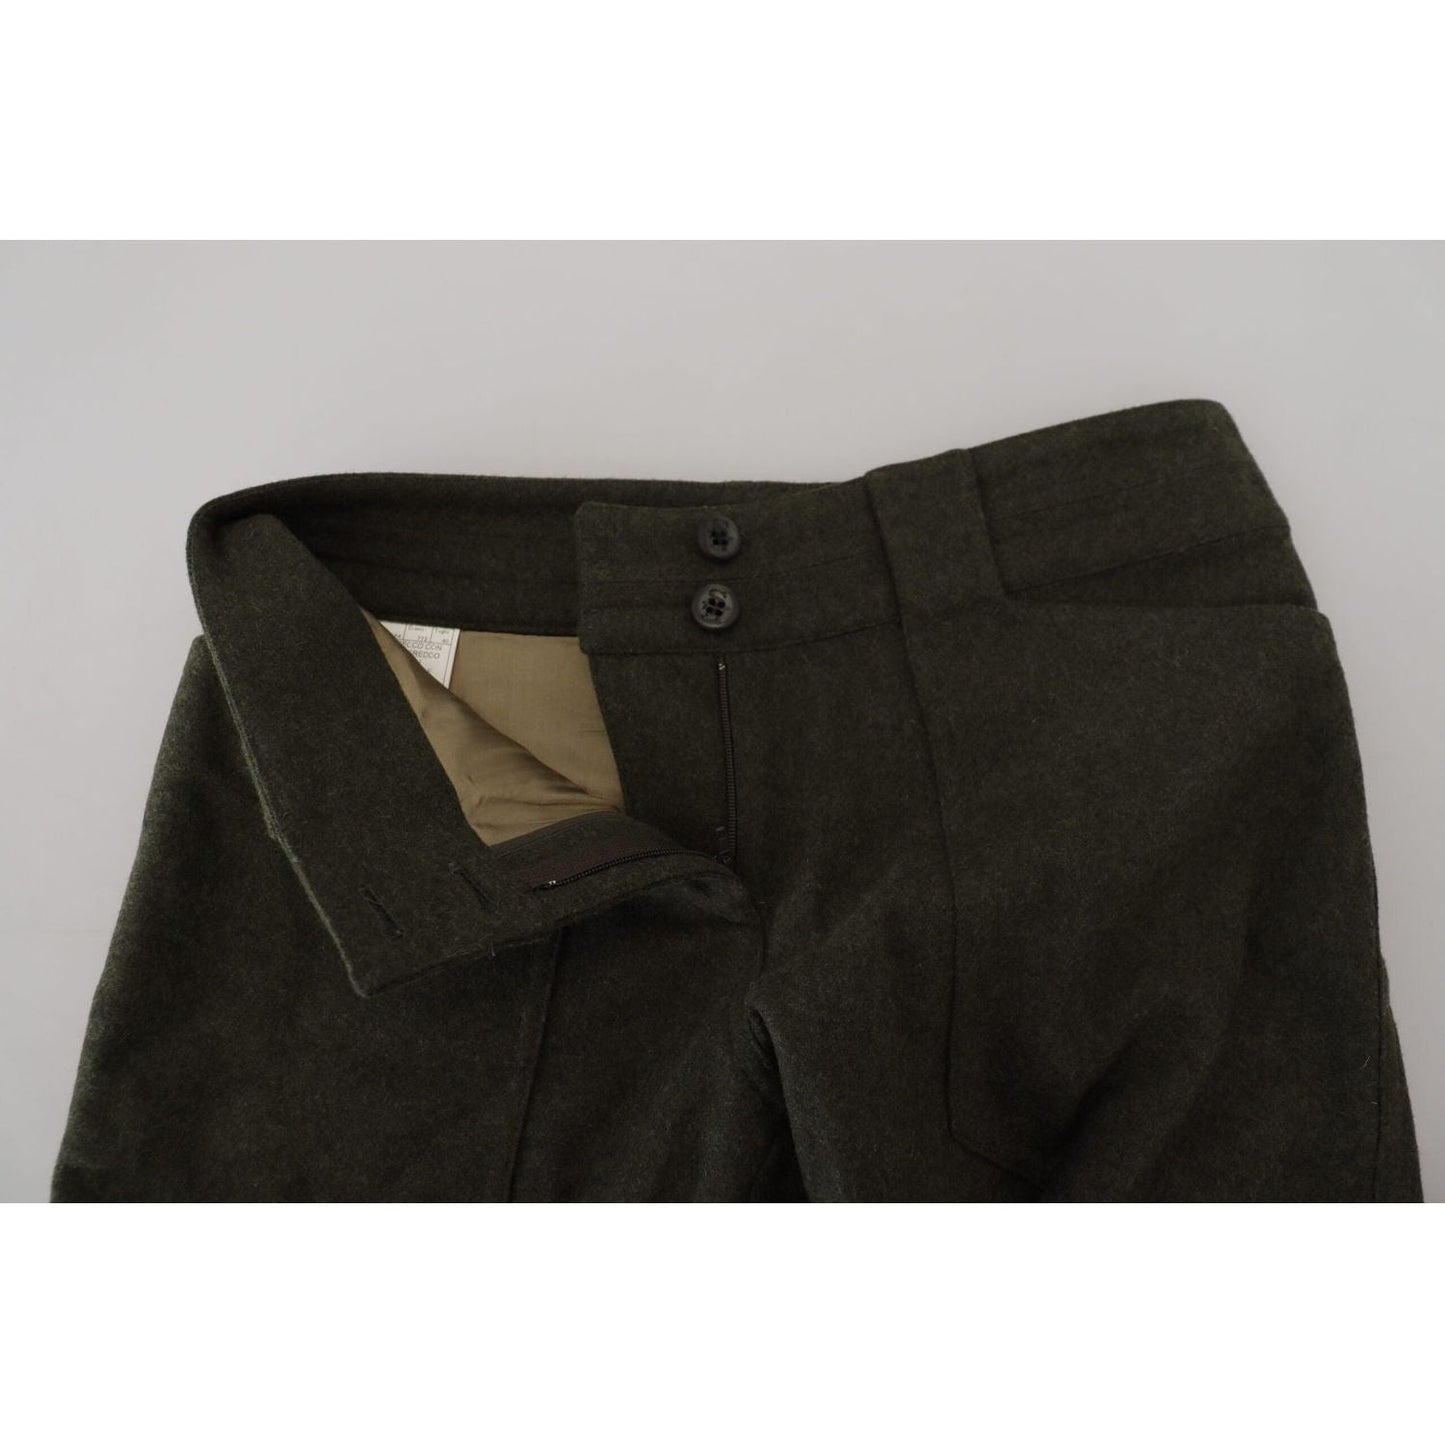 Ermanno Scervino Elegant Tapered Green Wool-Blend Pants green-lace-up-leg-women-tapered-pants